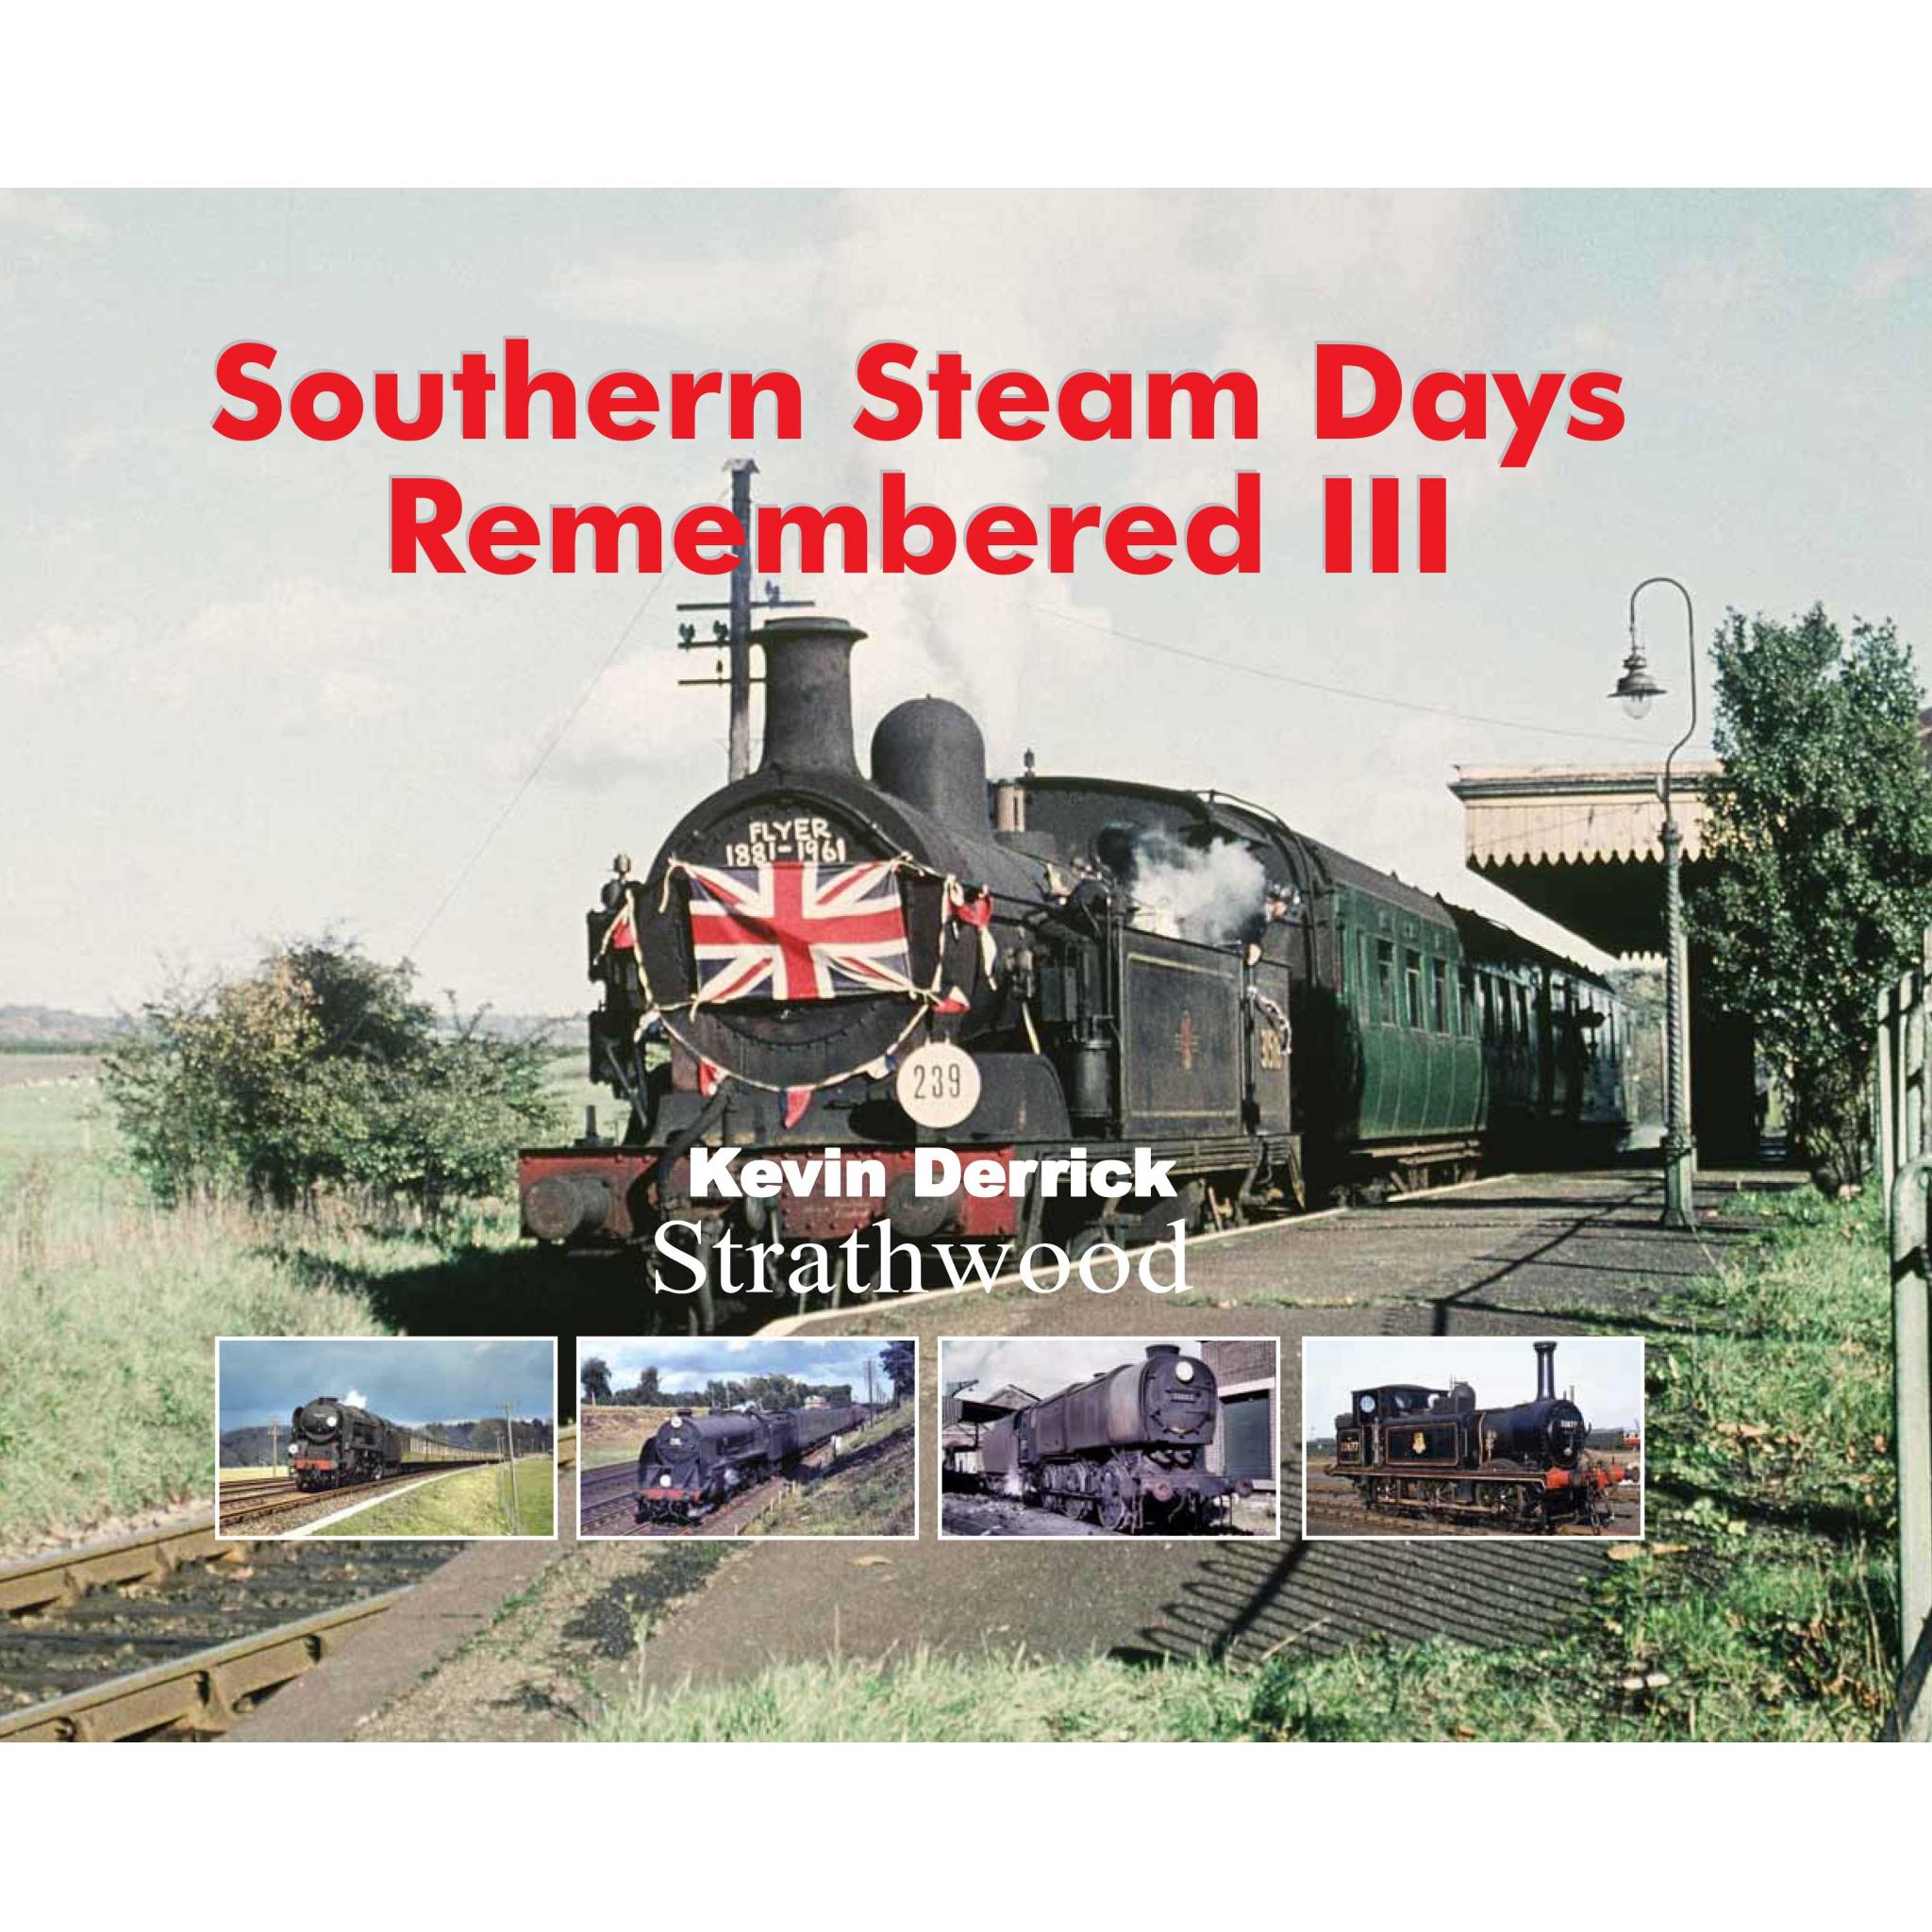 Southern Steam Days Remembered III